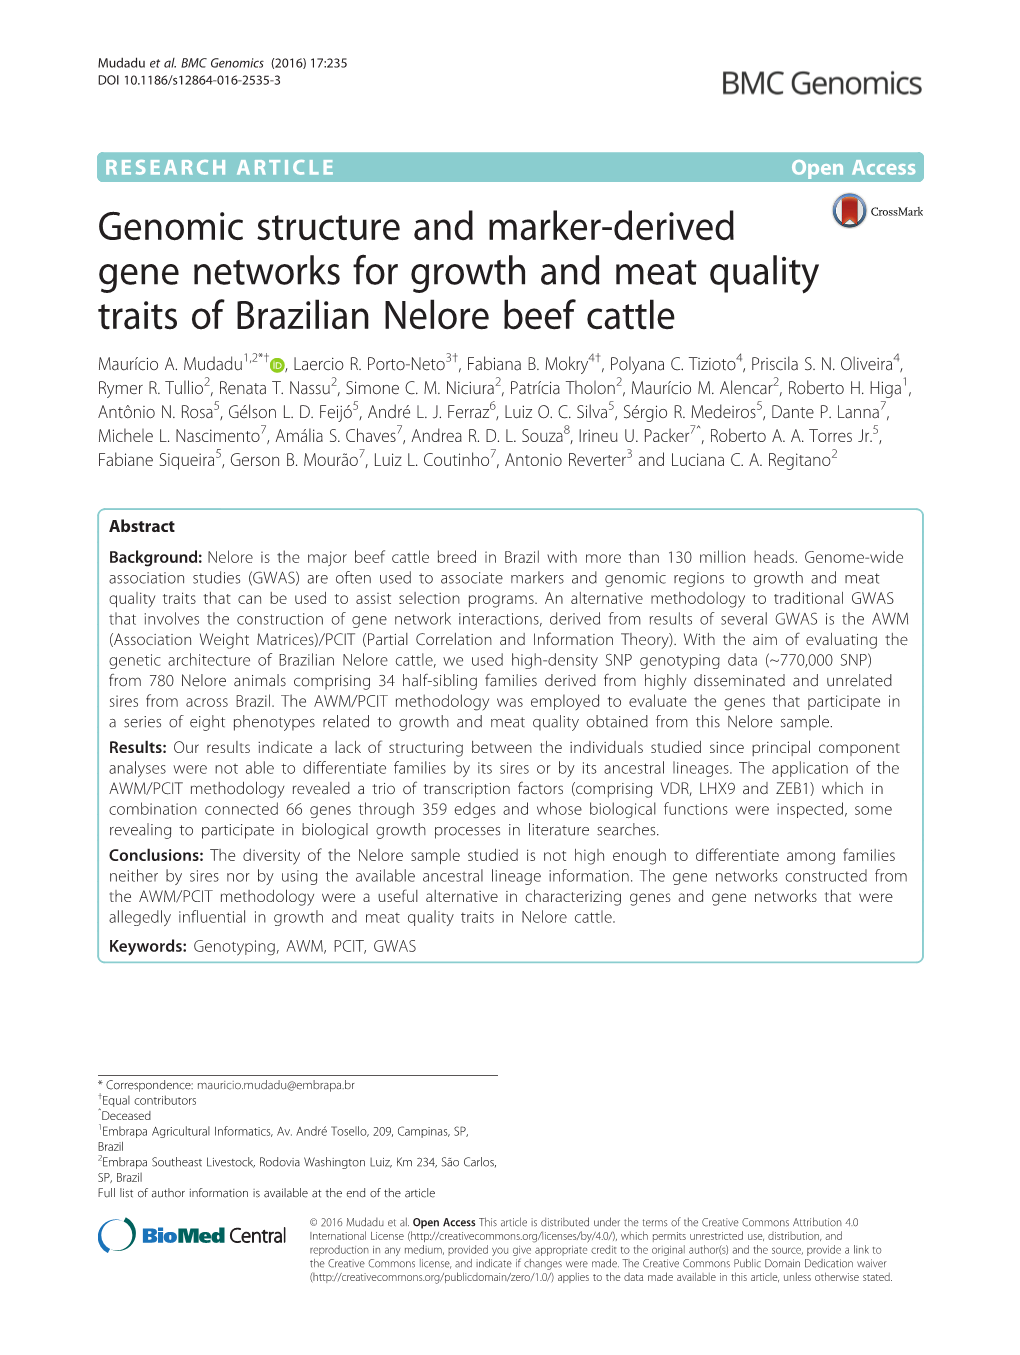 Genomic Structure and Marker-Derived Gene Networks for Growth and Meat Quality Traits of Brazilian Nelore Beef Cattle Maurício A